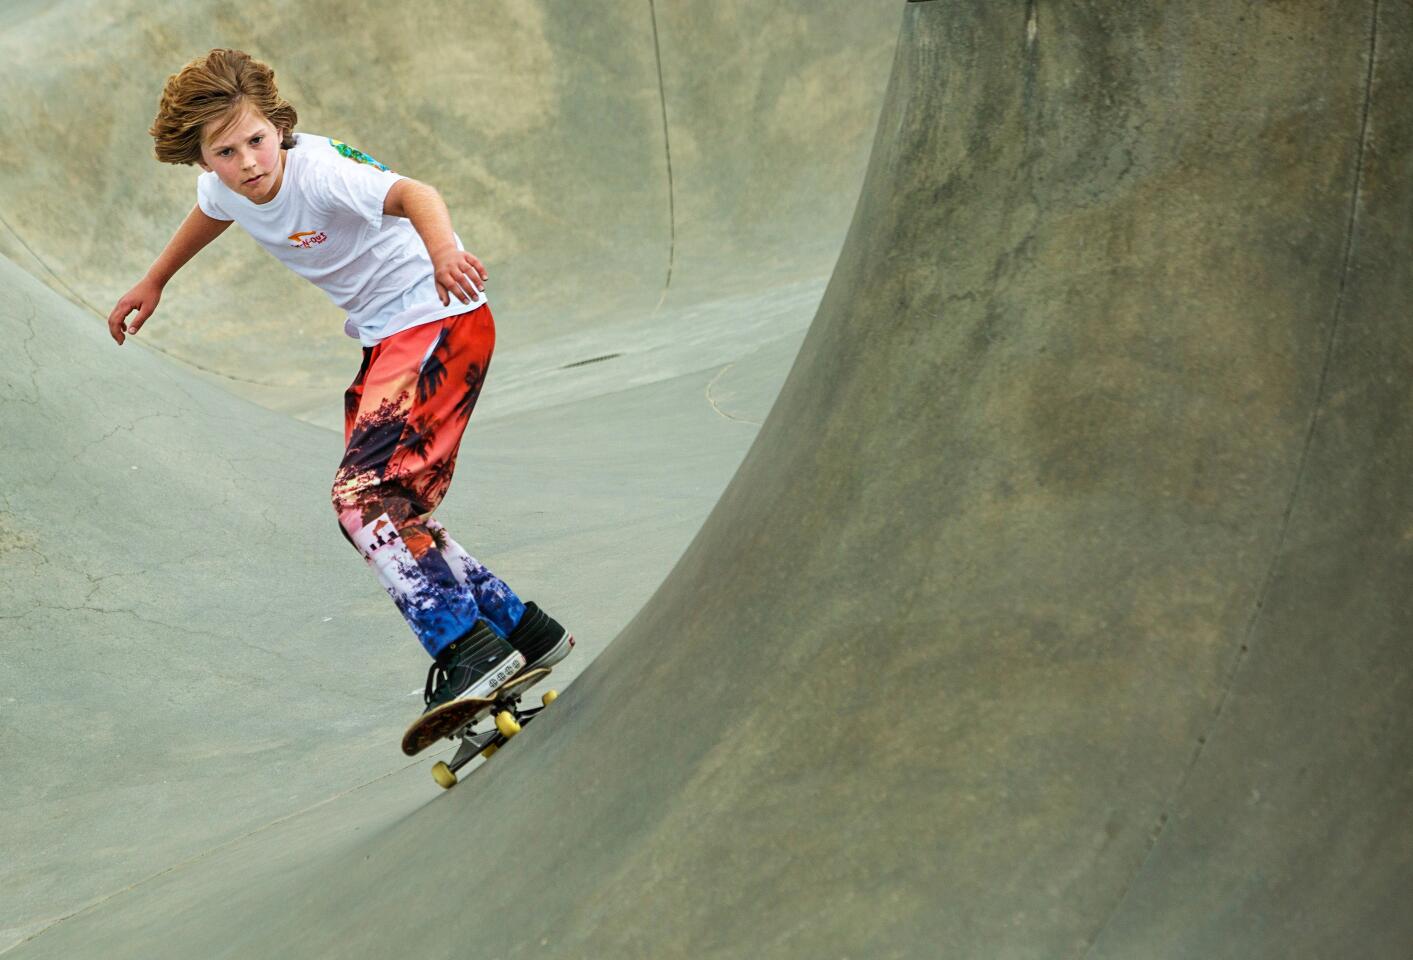 While on vacation with his family Liam Bengtsson, 12, of Fort Worth was at Venice Skate Park on Monday, March in Venice.